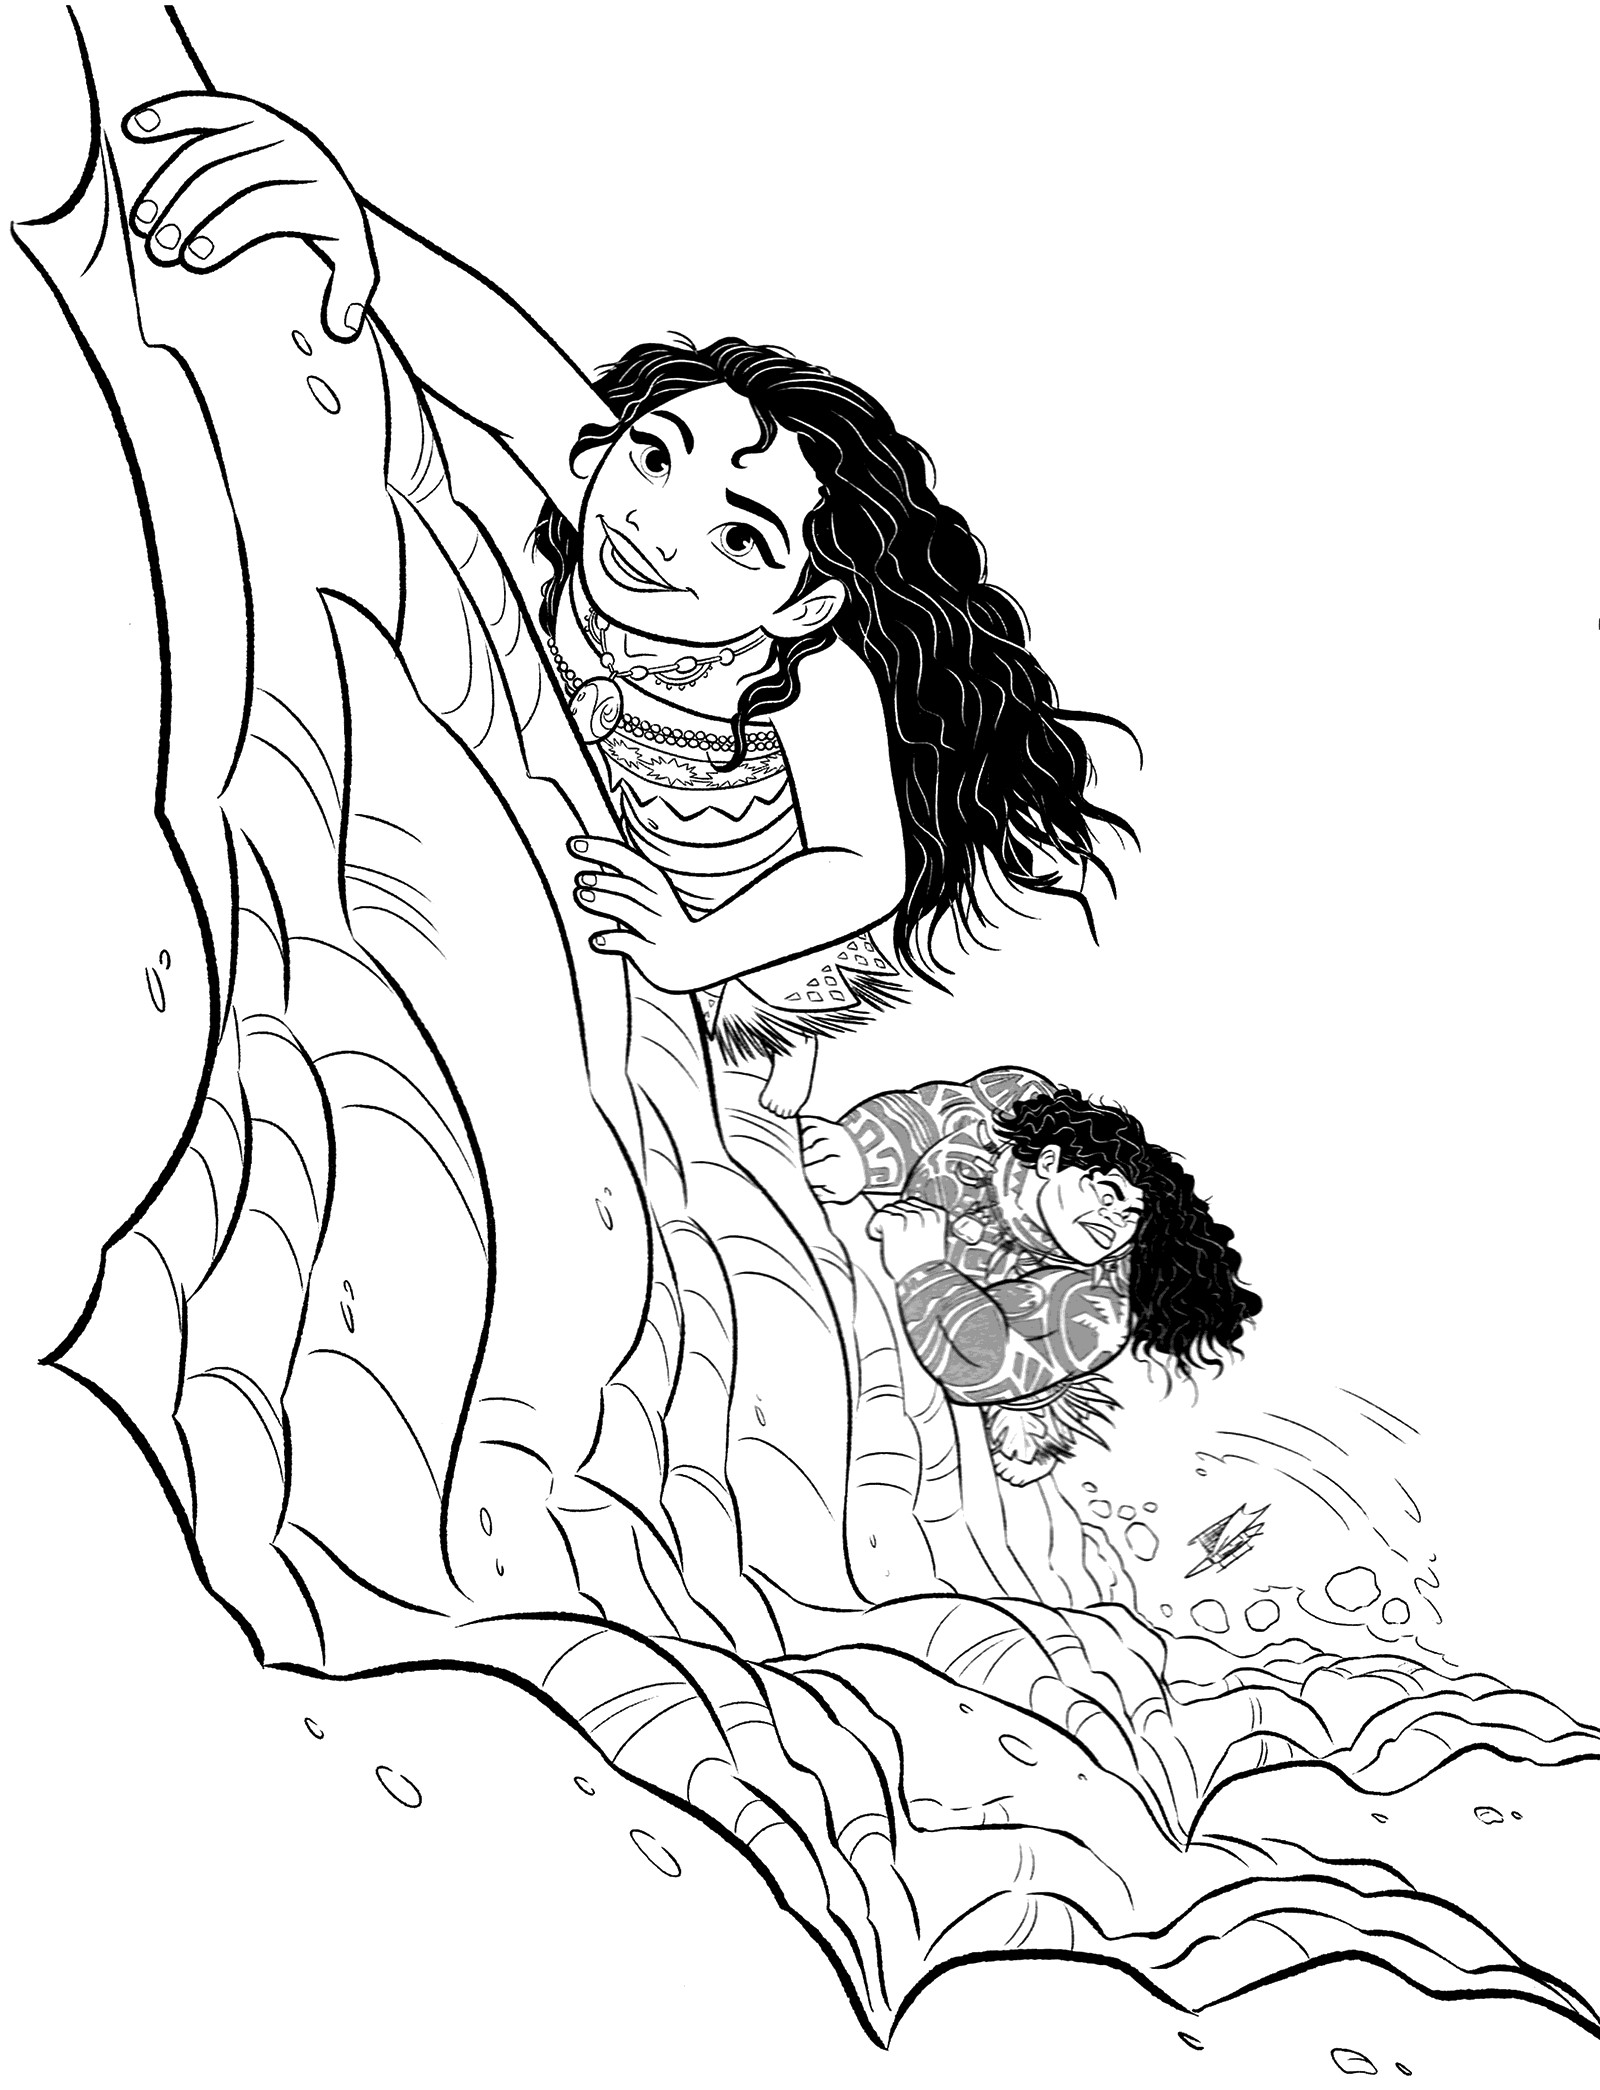 Moana Coloring Pages For Kids
 Moana Coloring Pages Best Coloring Pages For Kids